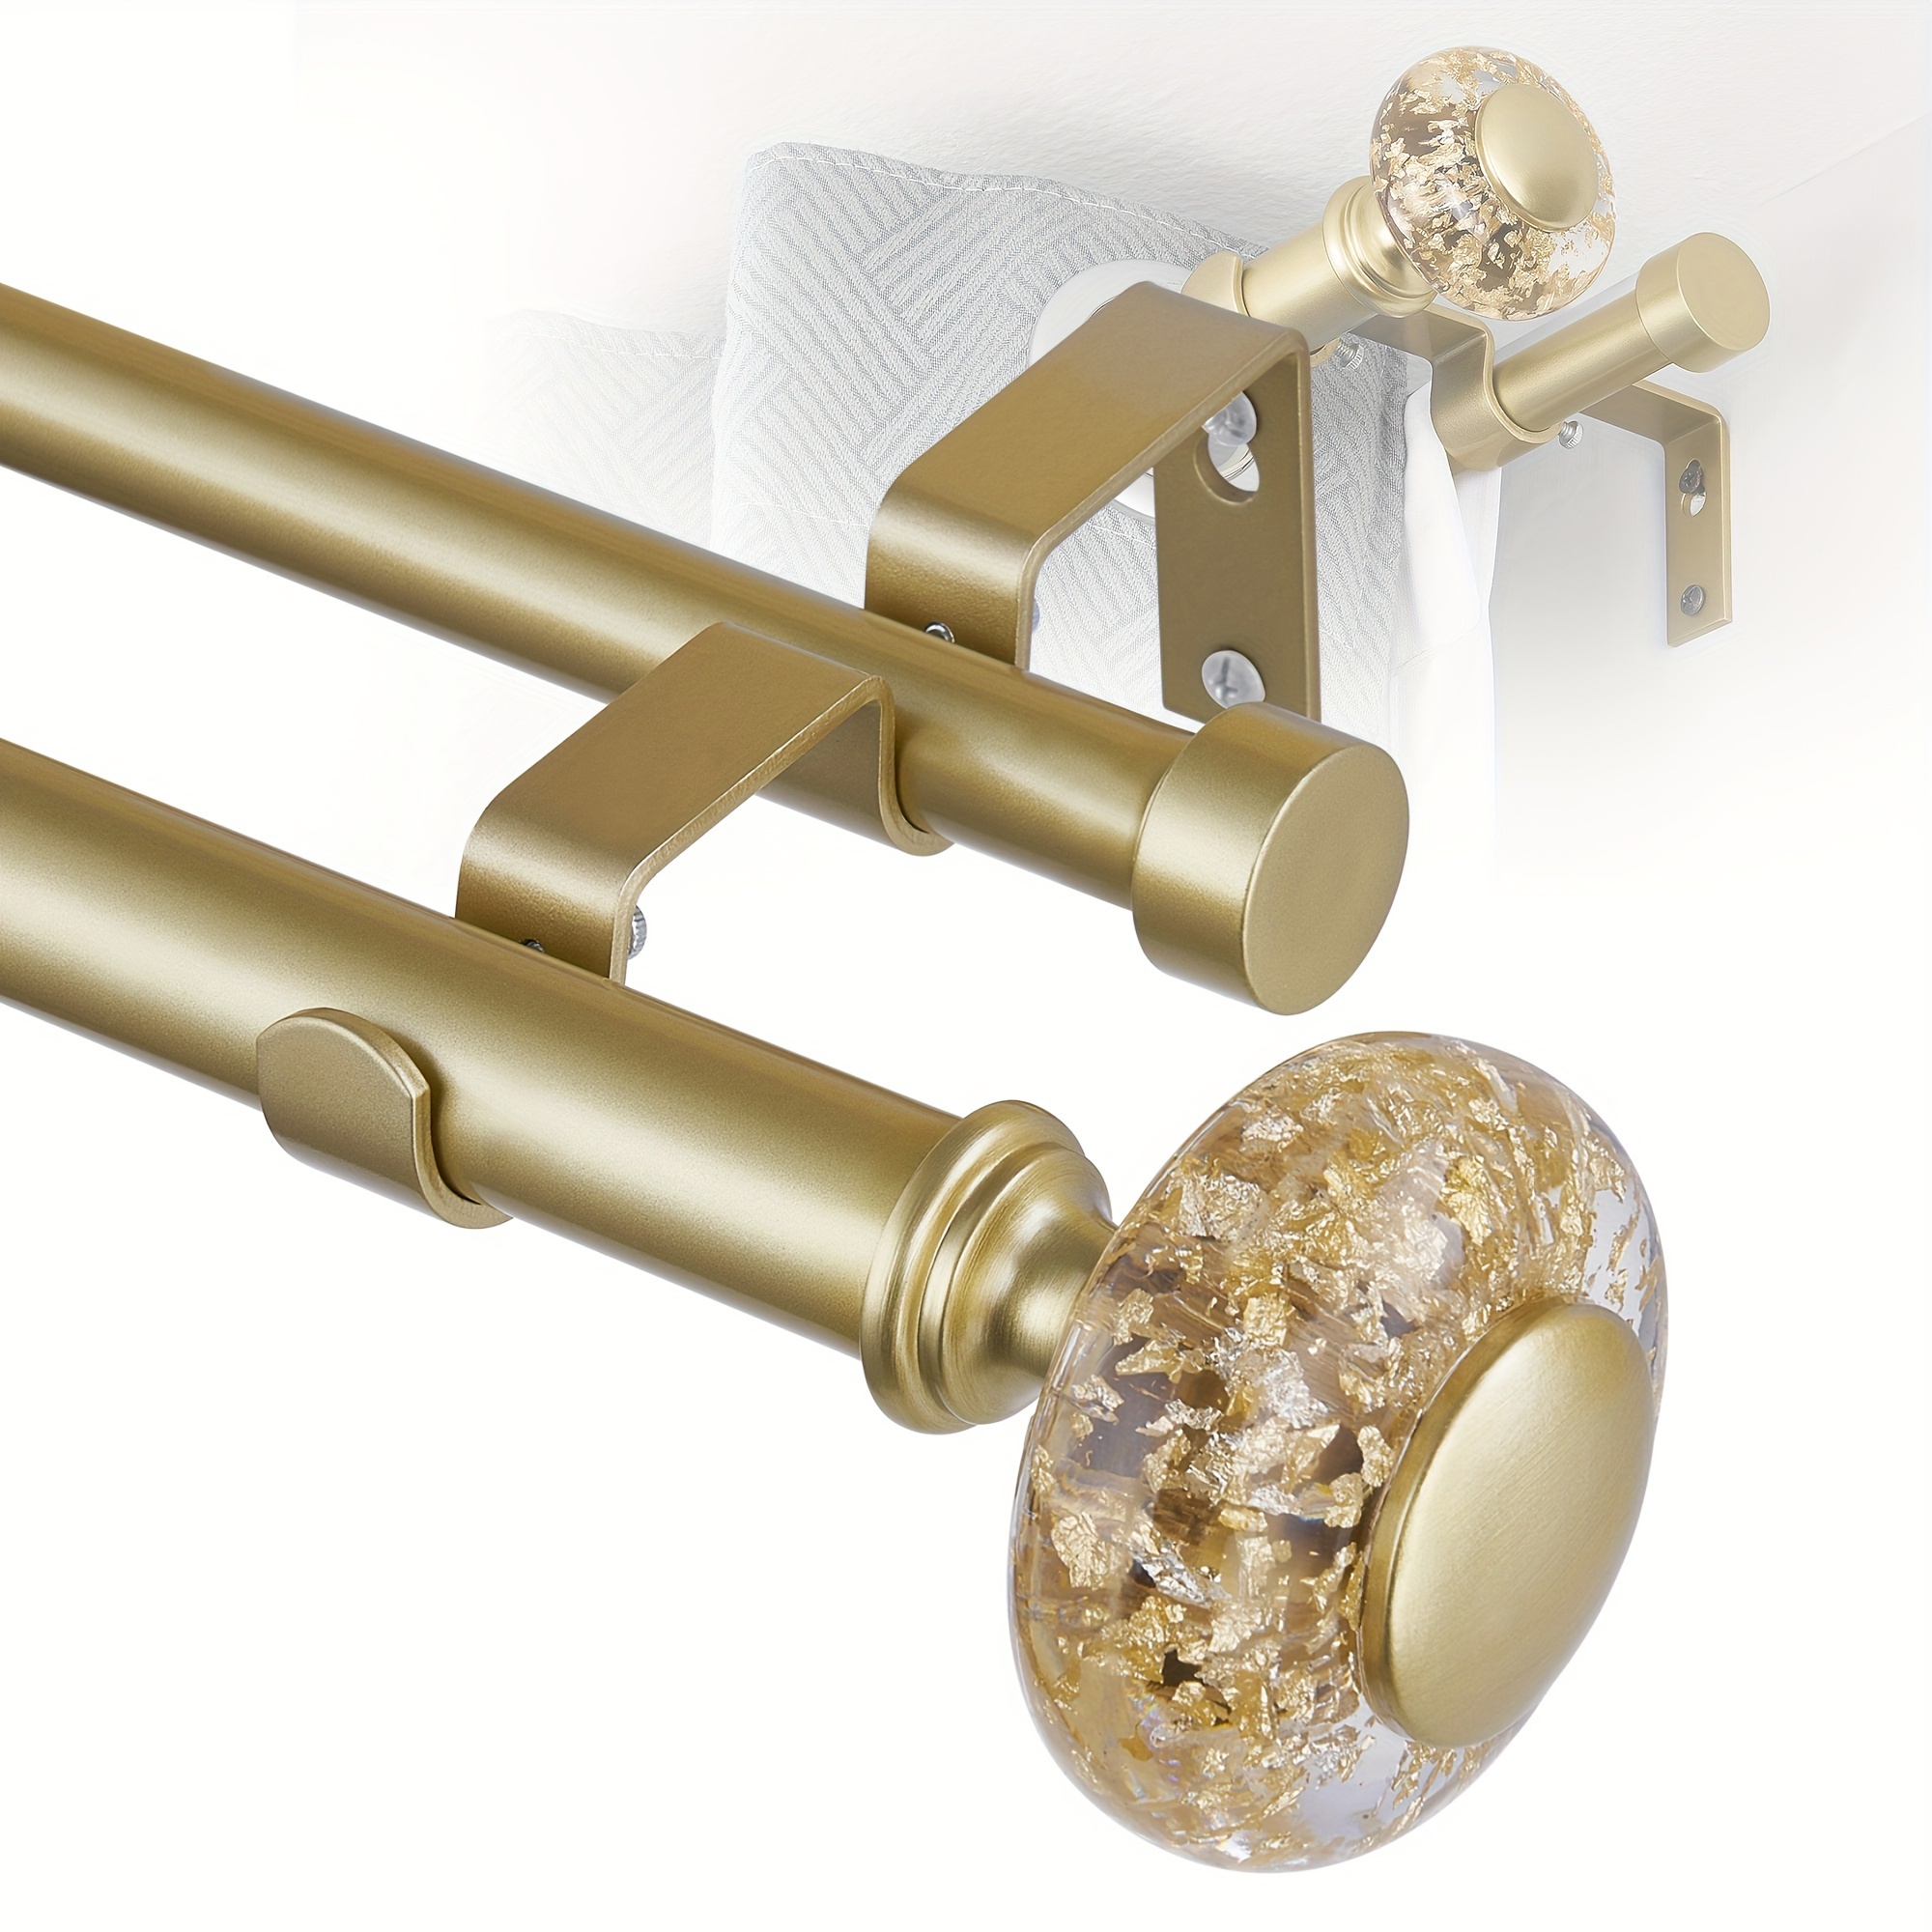 

Double Curtain Rod For Windows 32-72 Inch: 1 Inch Adjustable Acrylic Set With Translucent Gold Foil Finials- Double Gold Decorative Curtain Rod With Brackets